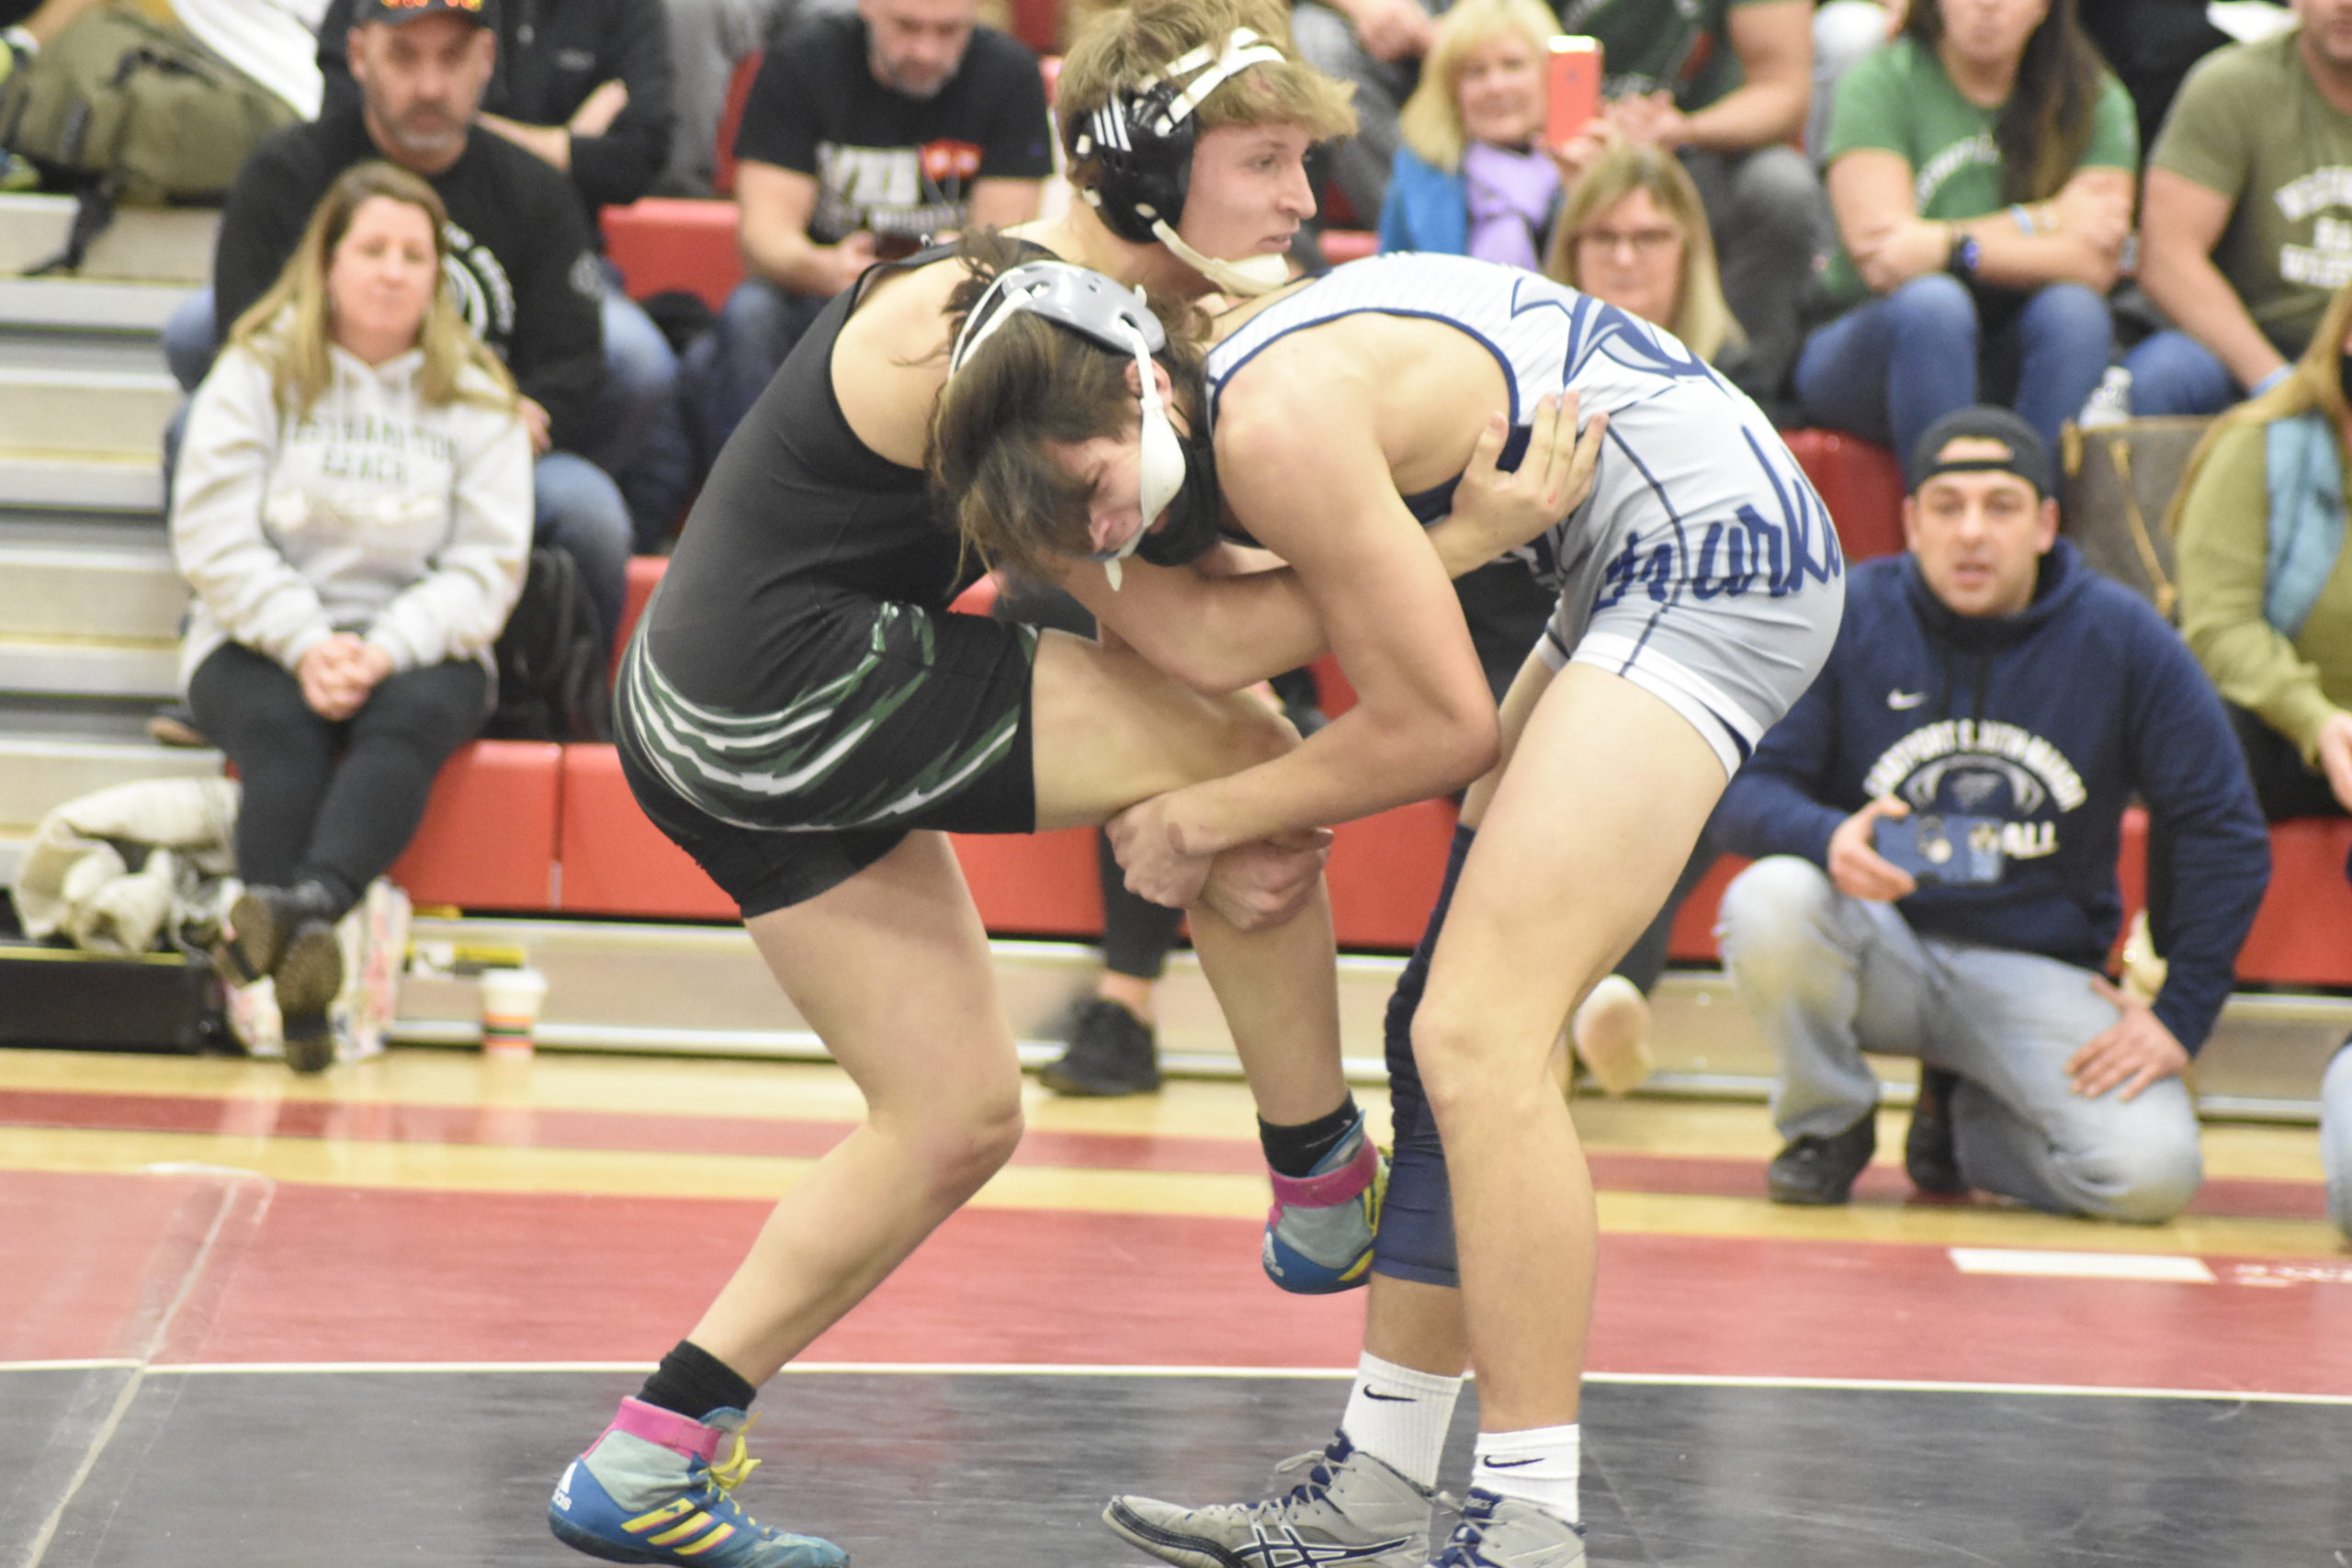 Dom Jurgel of Westhampton Beach tries to block an incoming takedown from ESM's Paul Drummond.